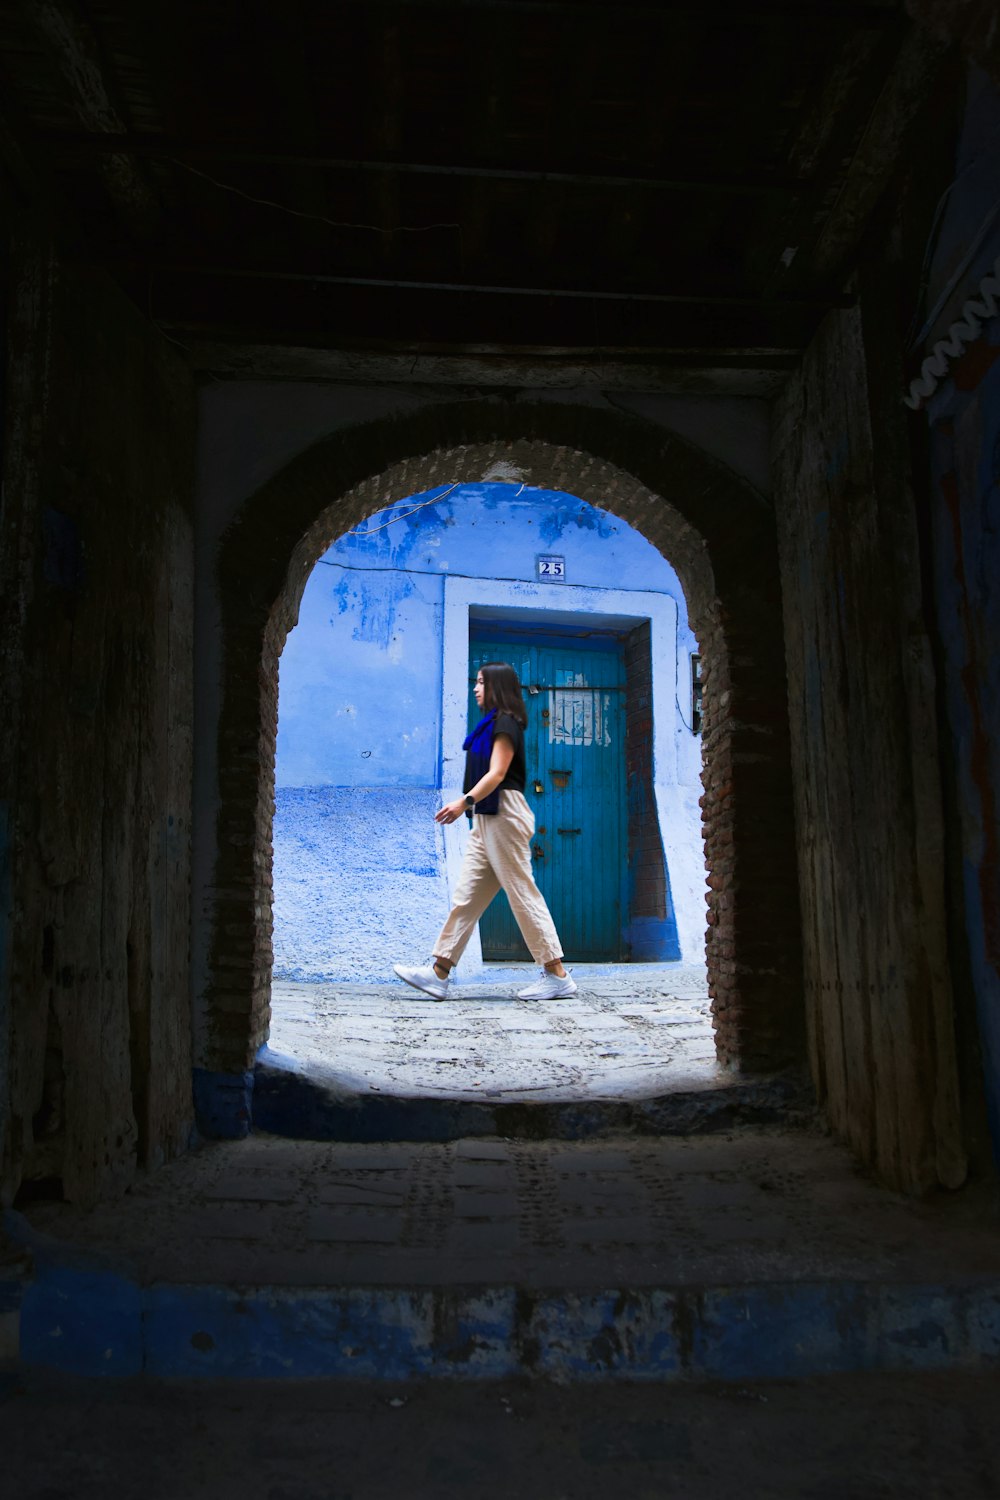 a woman walking through a tunnel with a blue door